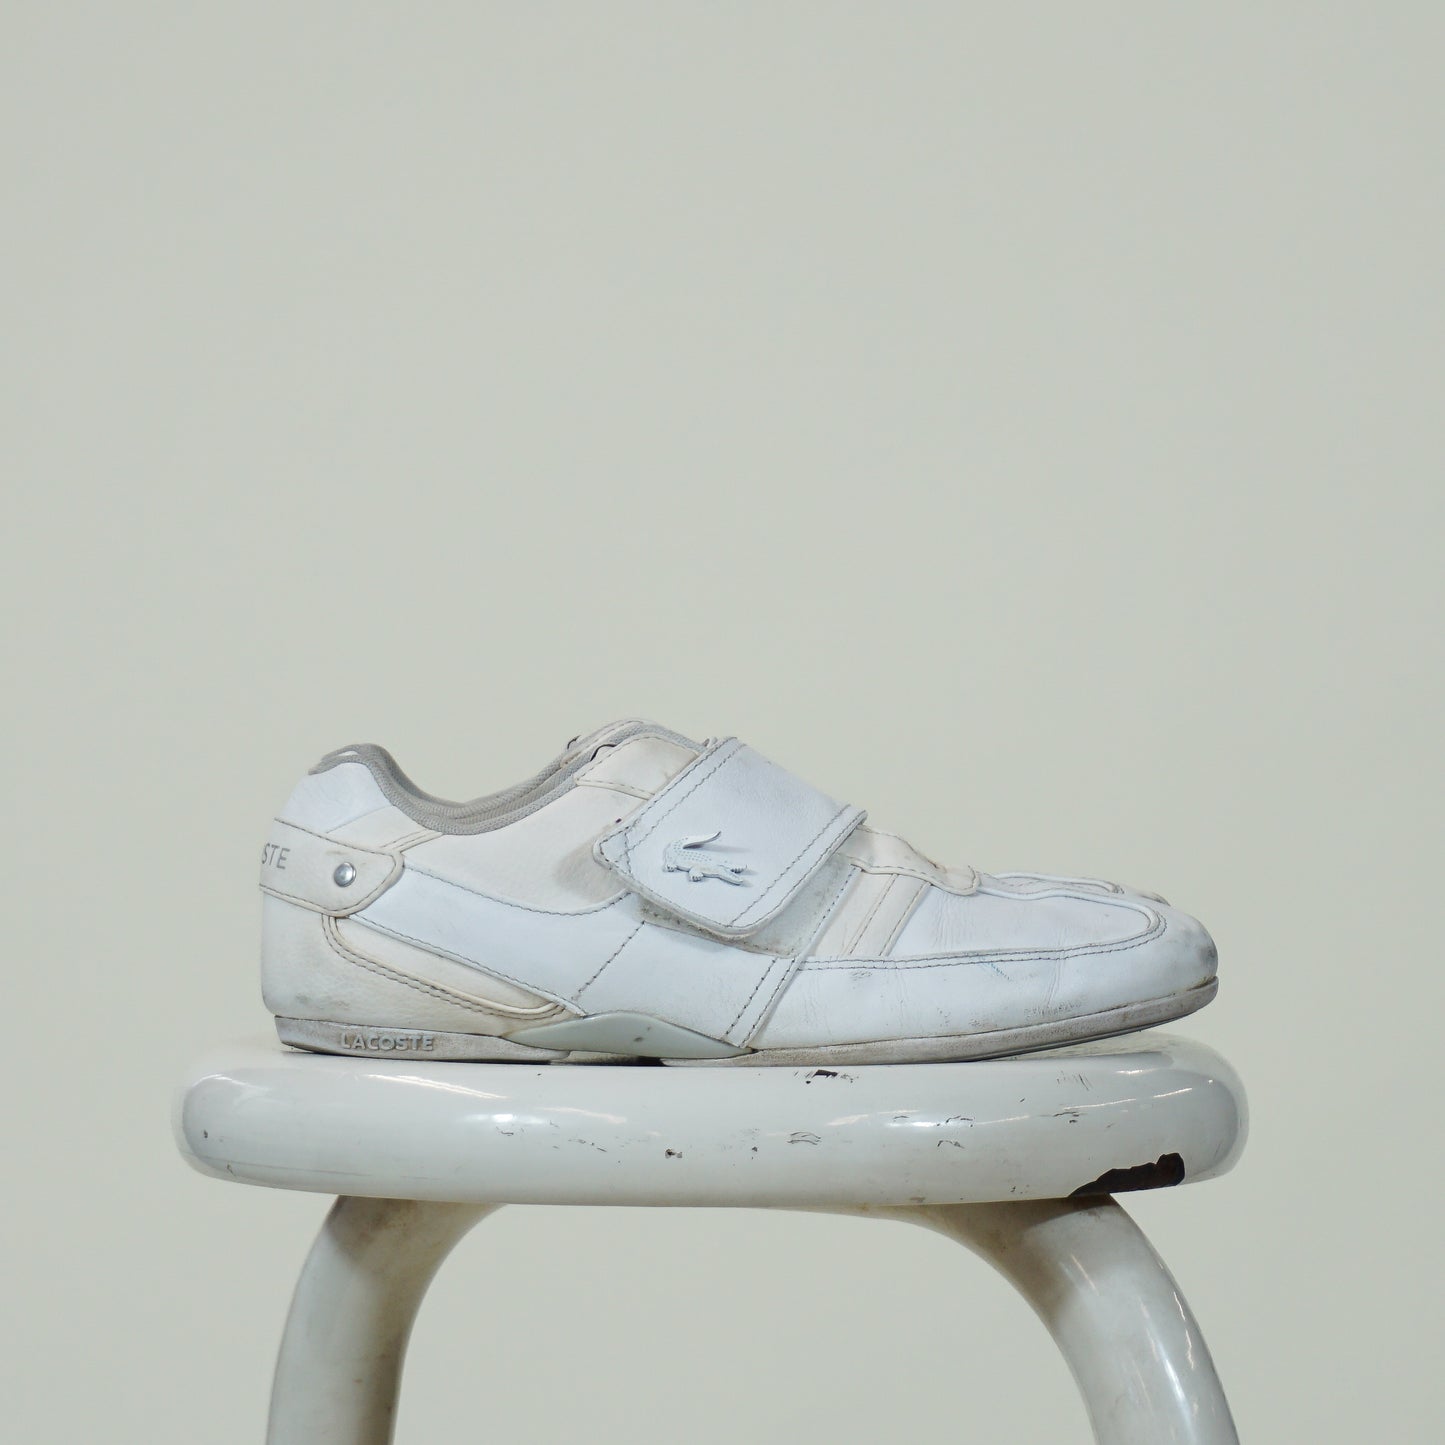 Lacoste White Tennis Shoes (7)